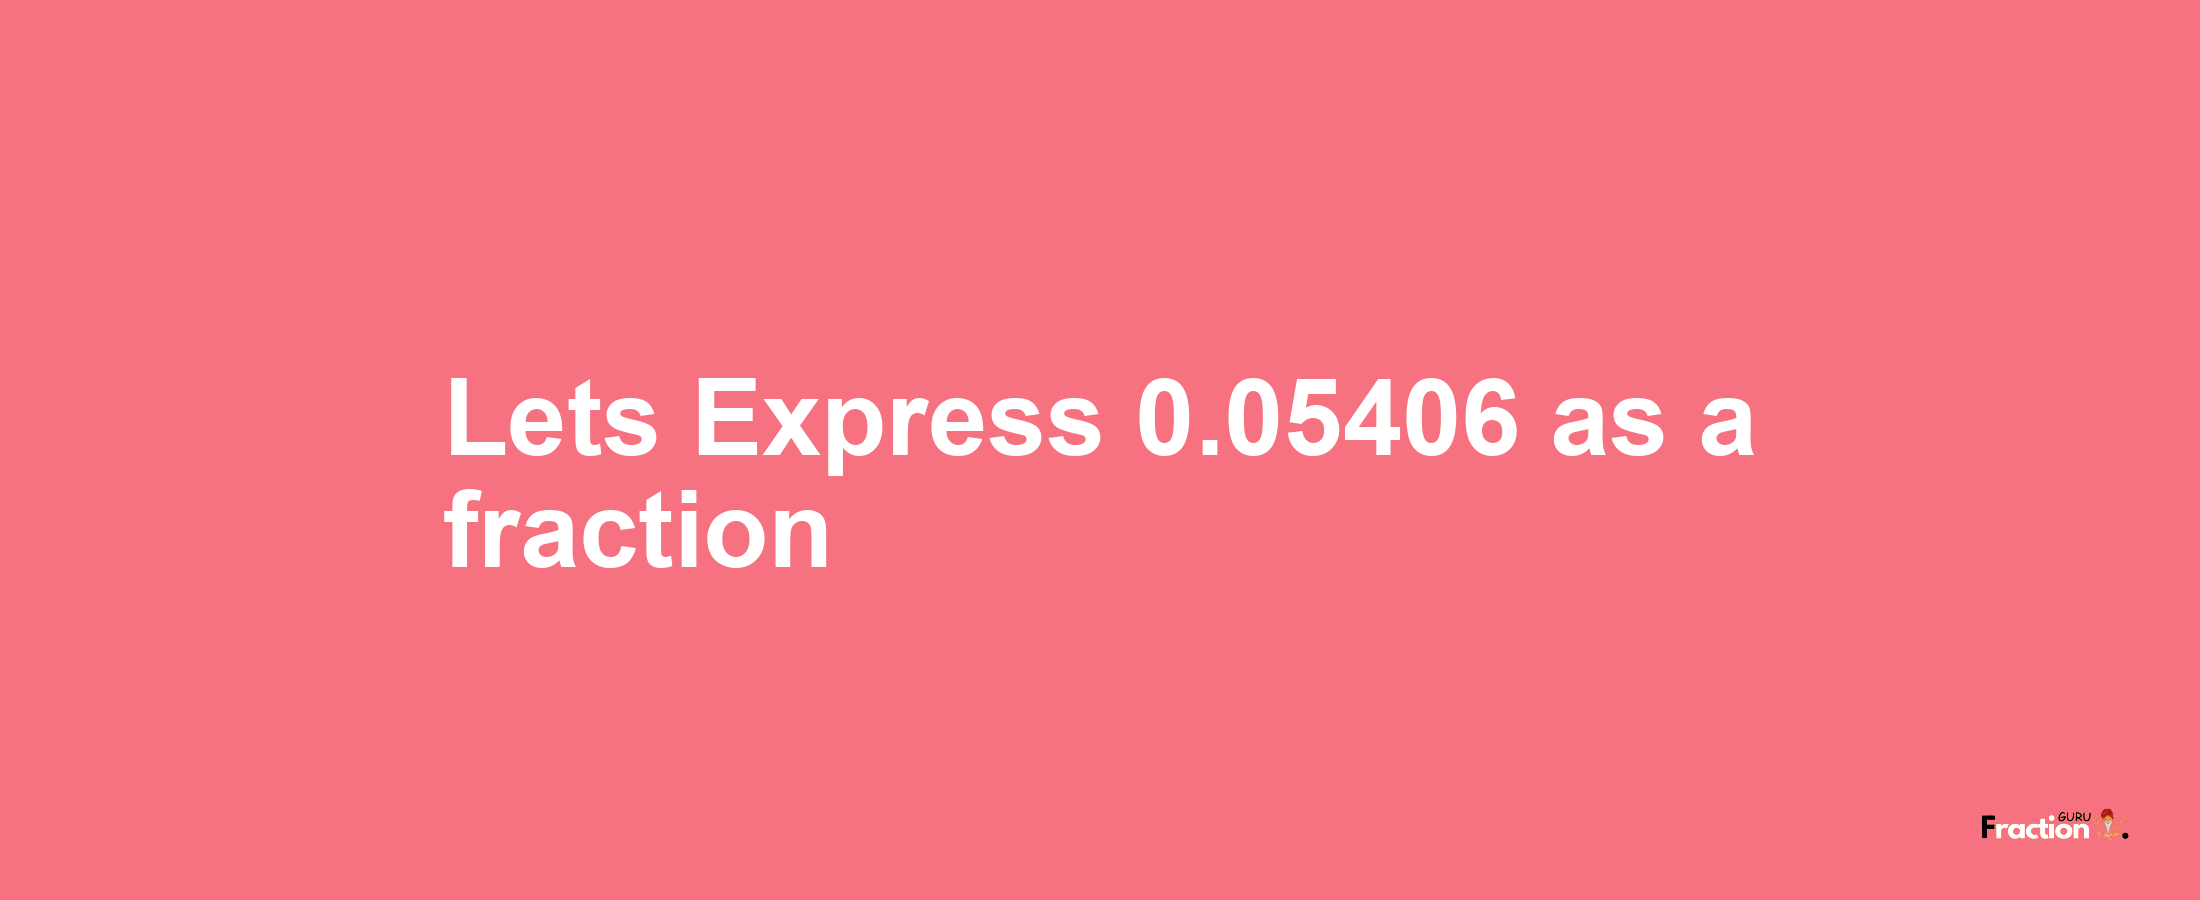 Lets Express 0.05406 as afraction